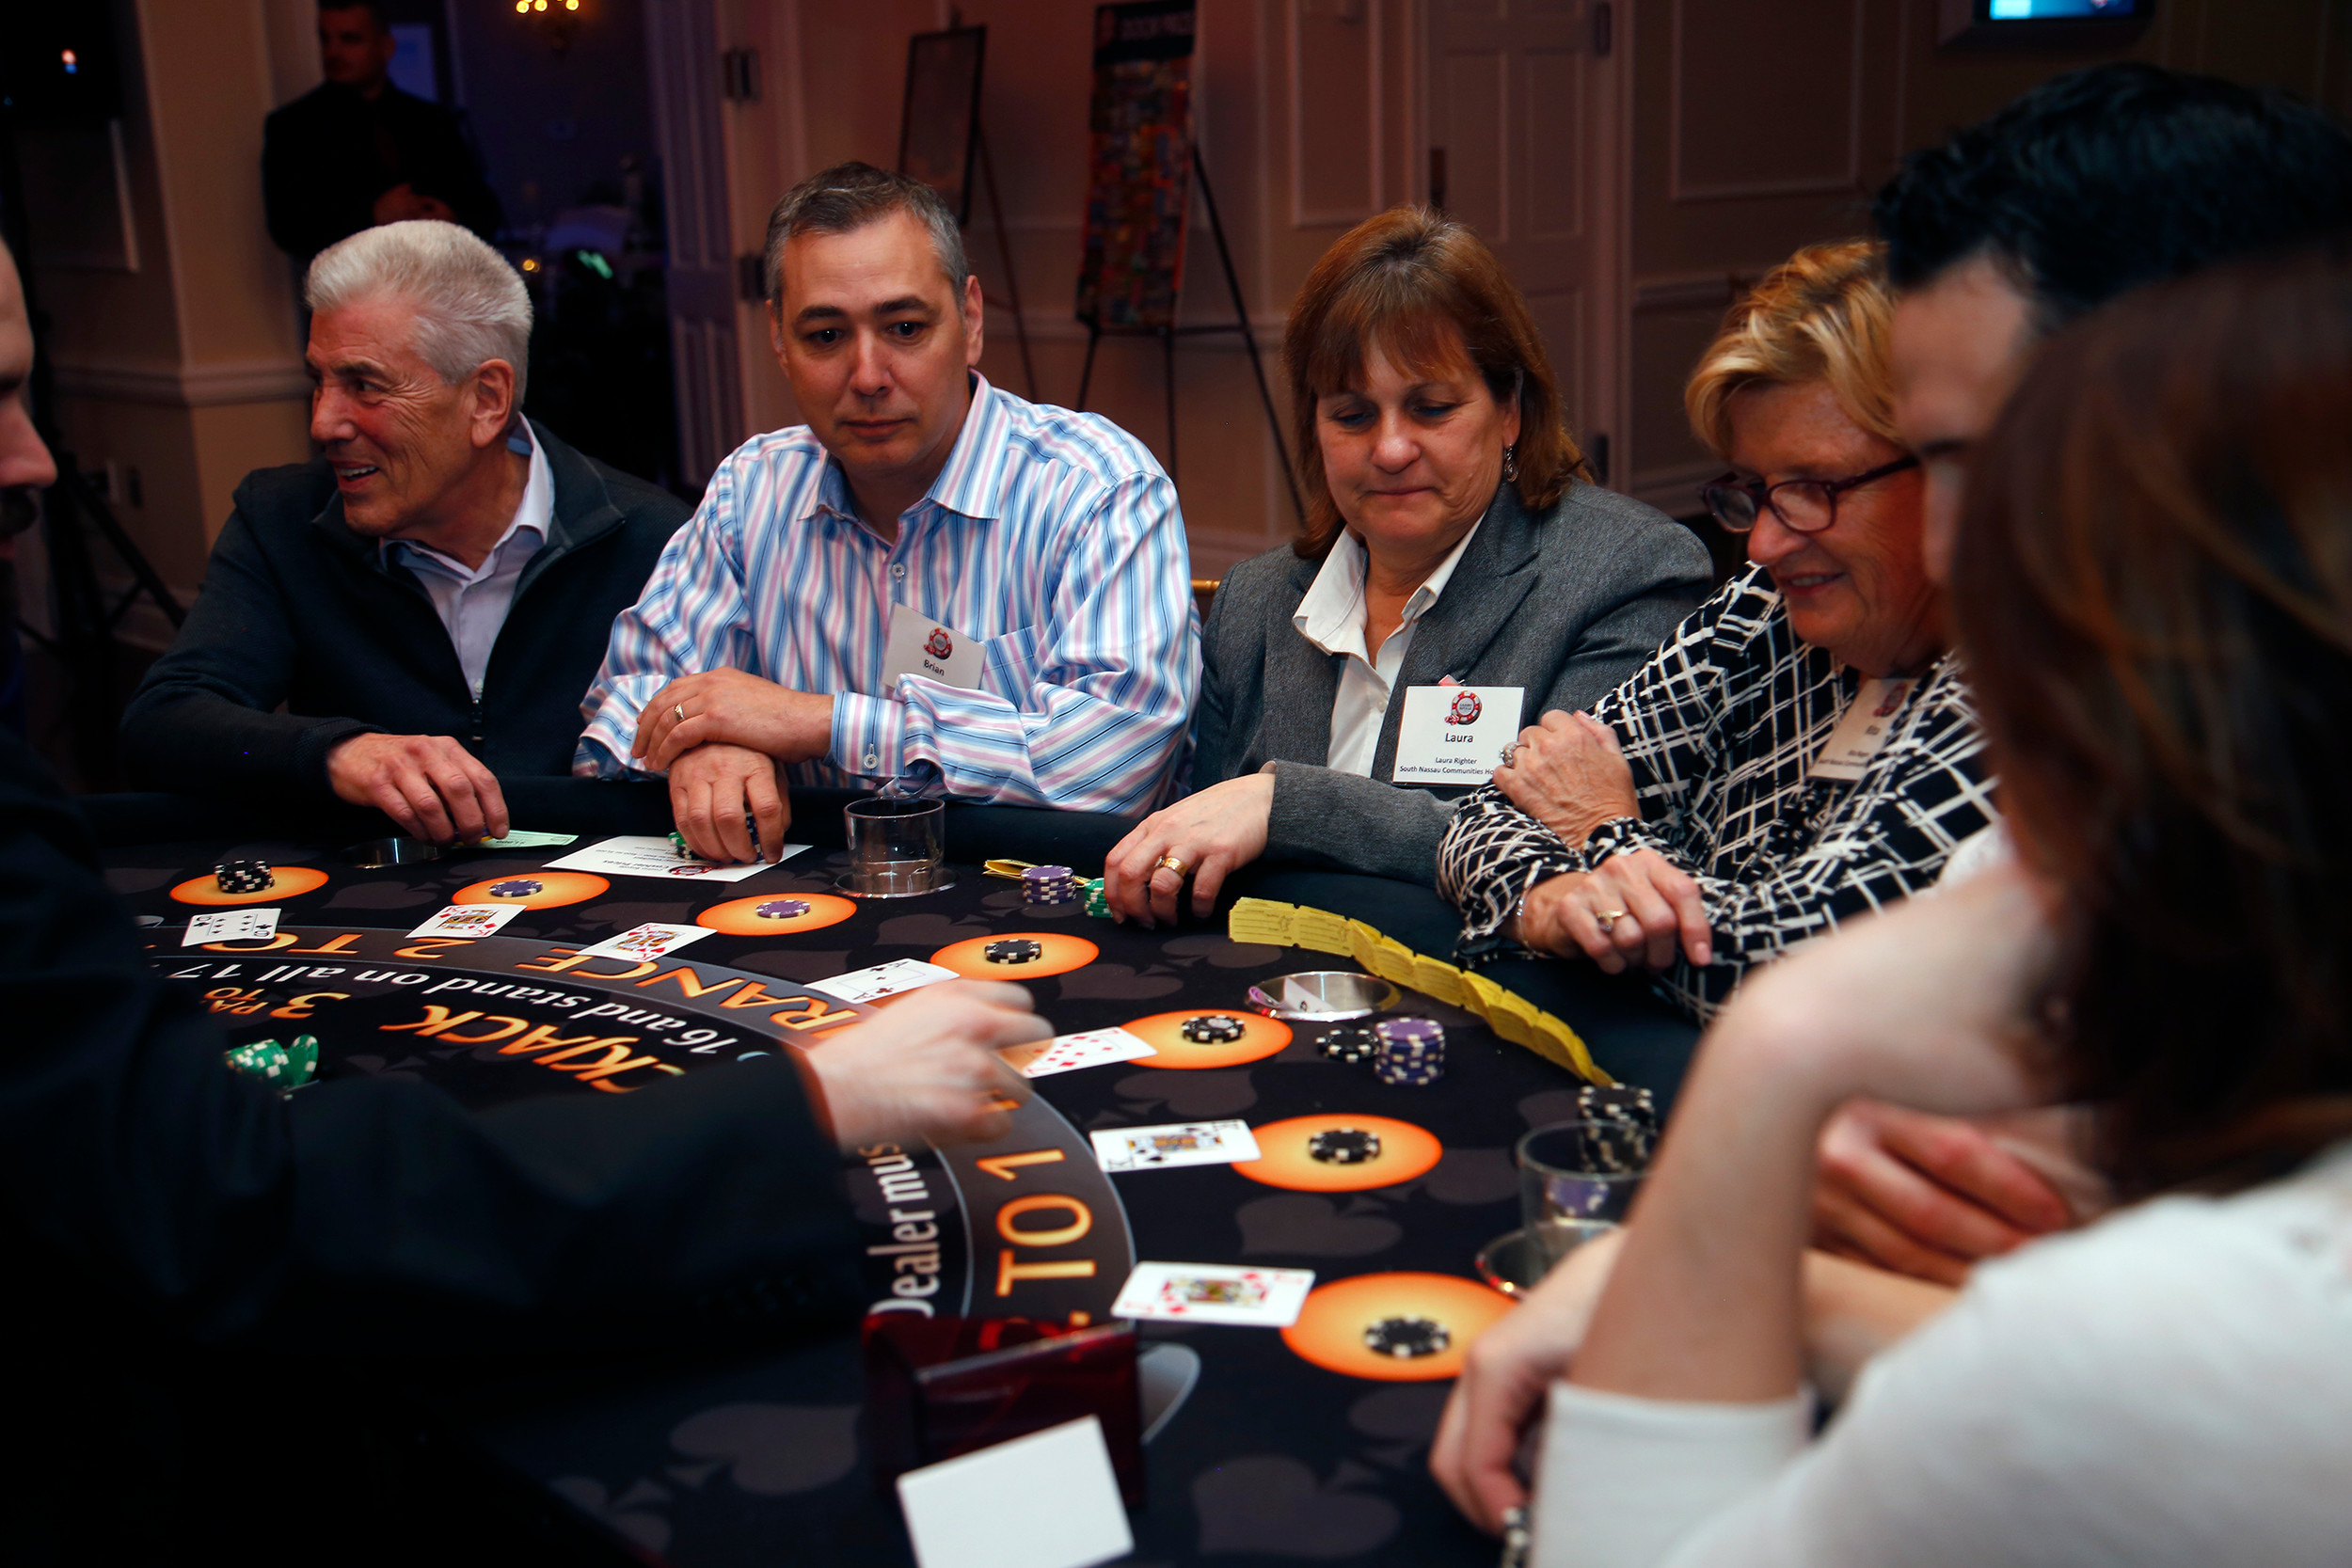 Nelson Weisberg, Brian Marmor, Laura Rightor and Rita Regan wait for the dealer to flip his card at the blackjack table.